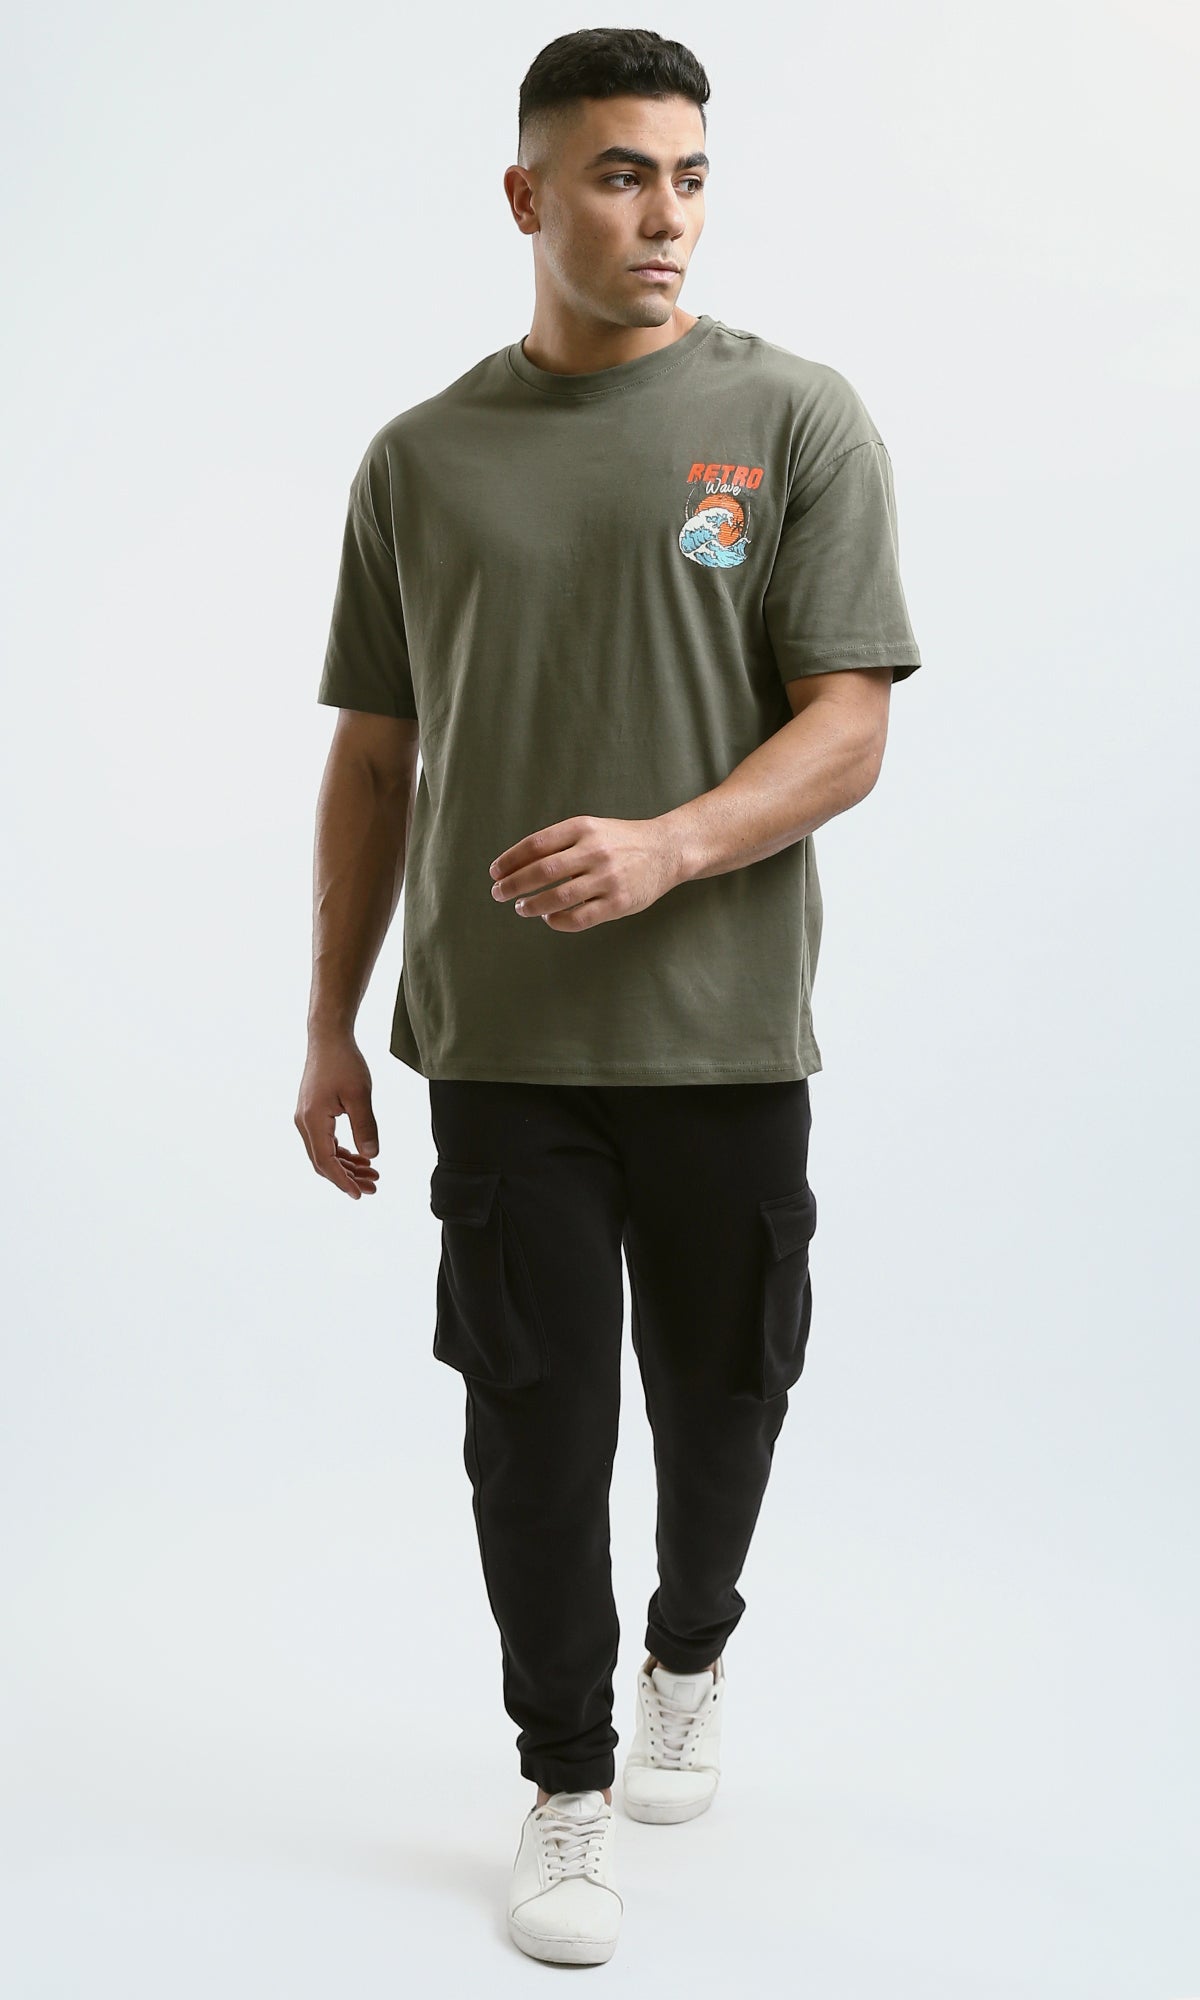 O182911 "Retro Wave" Short Sleeves Olive Casual Tee